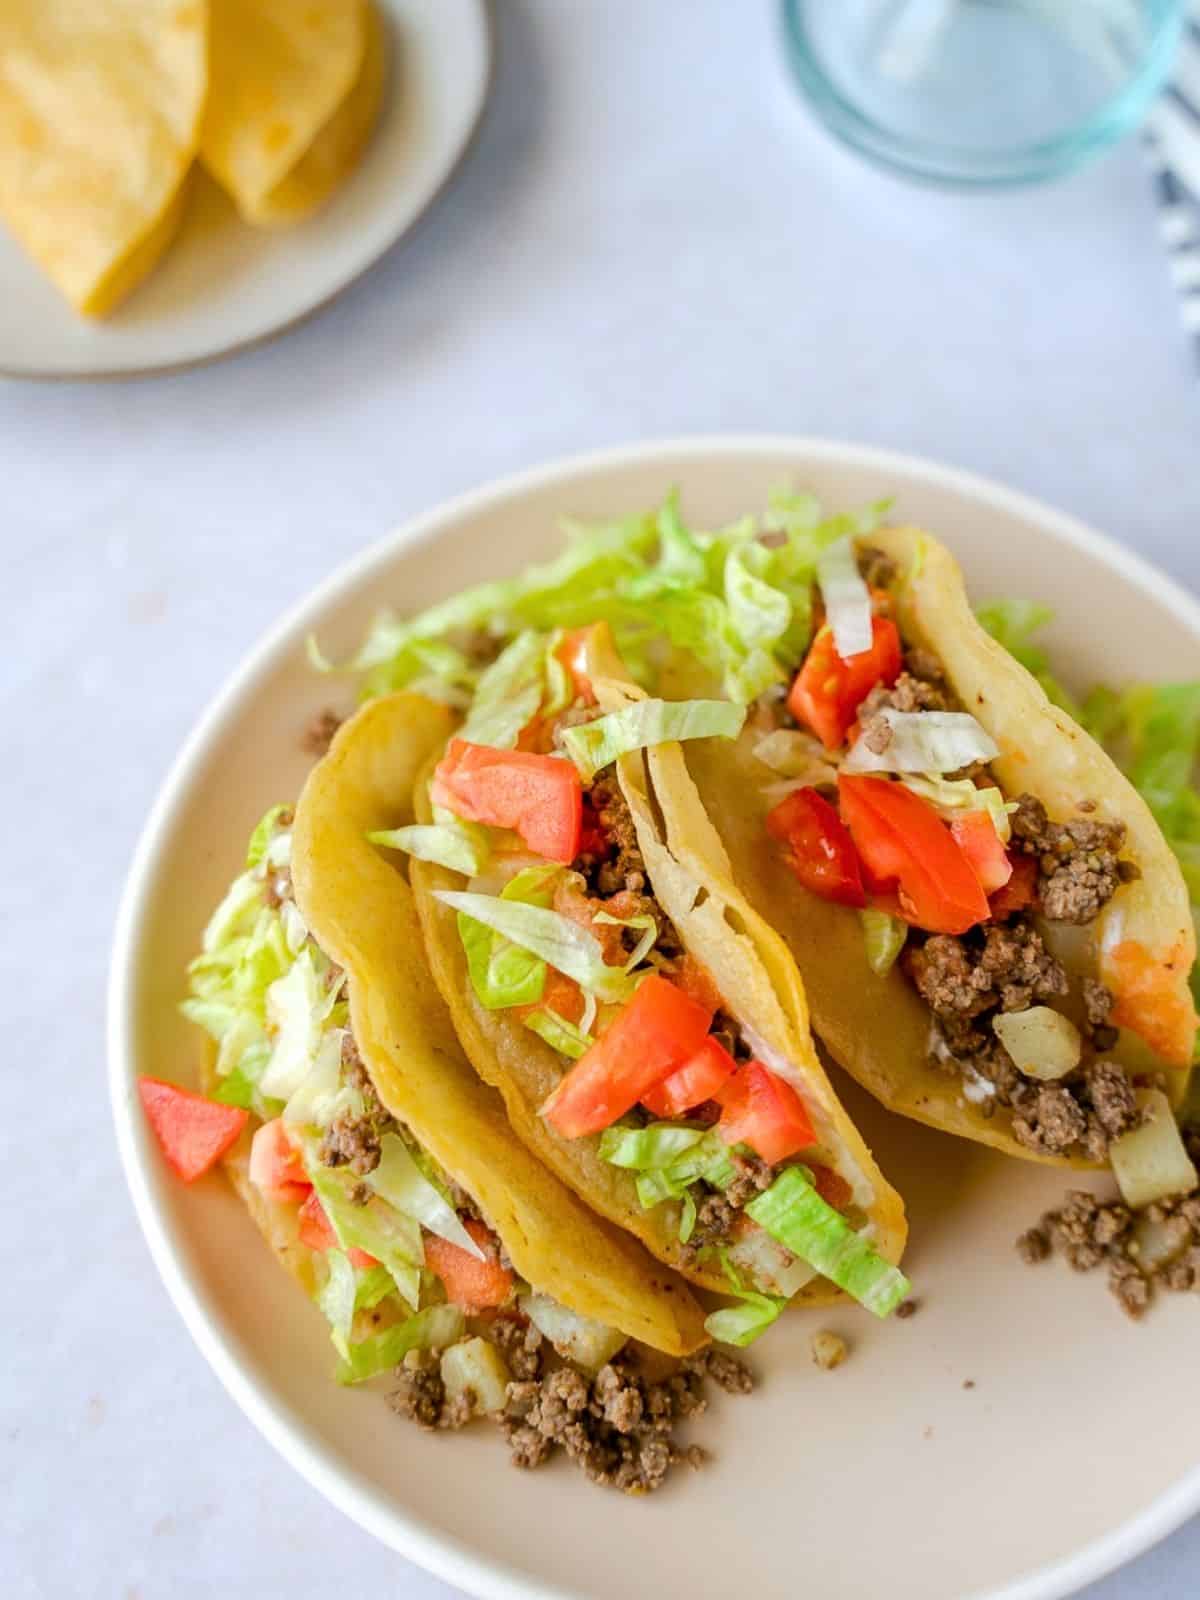 Three crispy Mexican picadillo tacos on a plate.